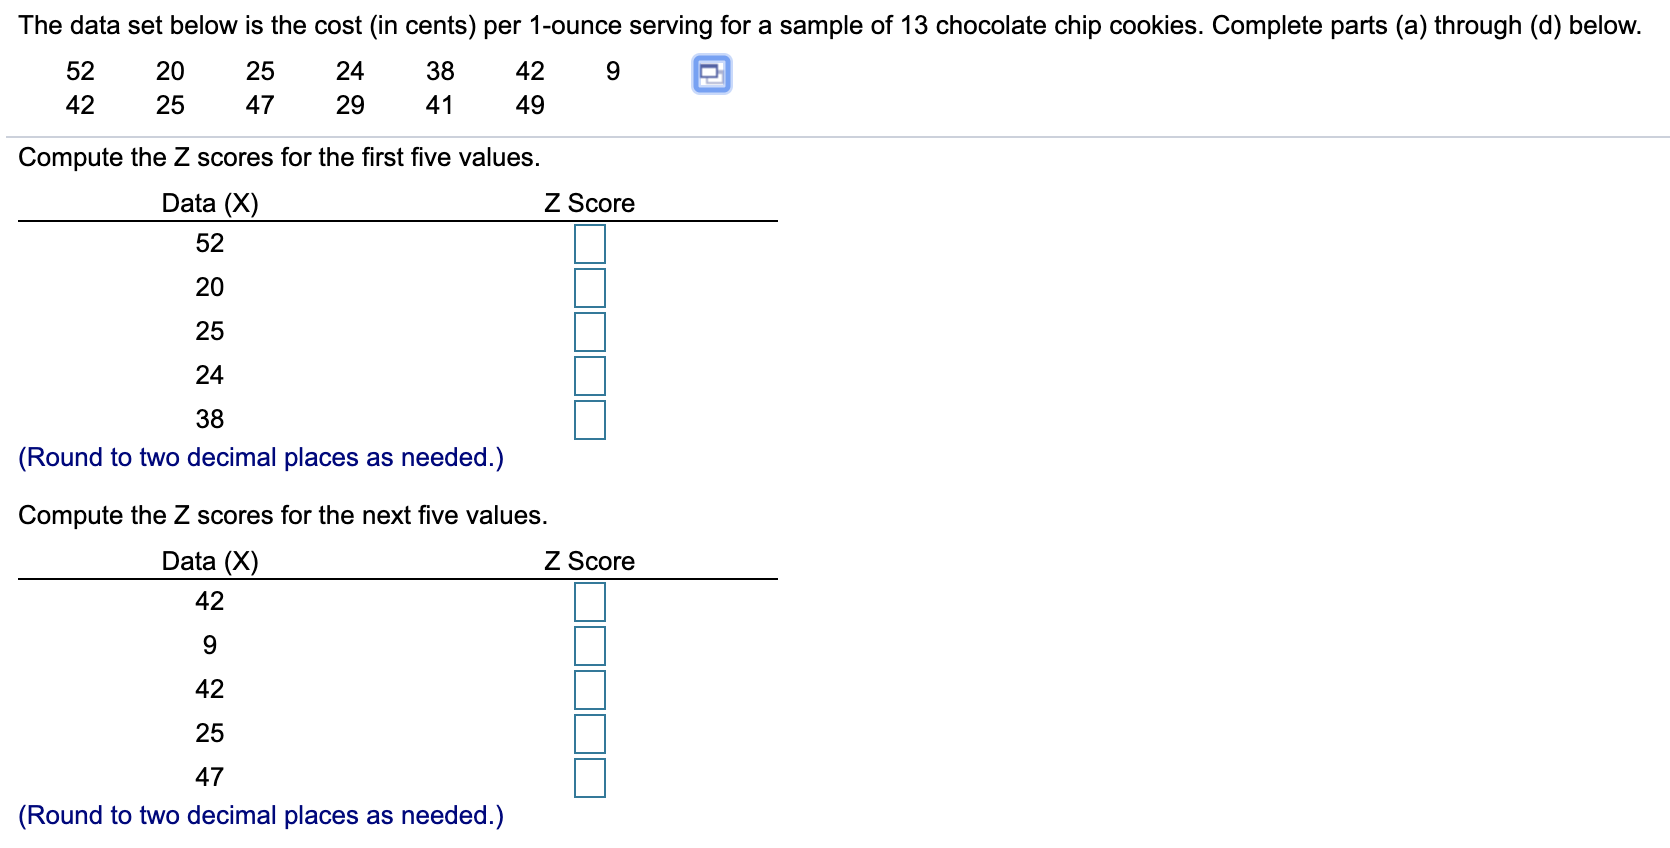 The data set below is the cost (in cents) per 1-ounce serving for a sample of 13 chocolate chip cookies. Complete parts (a) through (d) below.
52
20
25
24
38
42
9.
29
42
25
41
49
47
Compute the Z scores for the first five values.
Data (X)
Z Score
52
20
25
24
38
(Round to two decimal places as needed.)
Compute the Z scores for the next five values.
Data (X)
Z Score
42
42
25
47
(Round to two decimal places as needed.)
